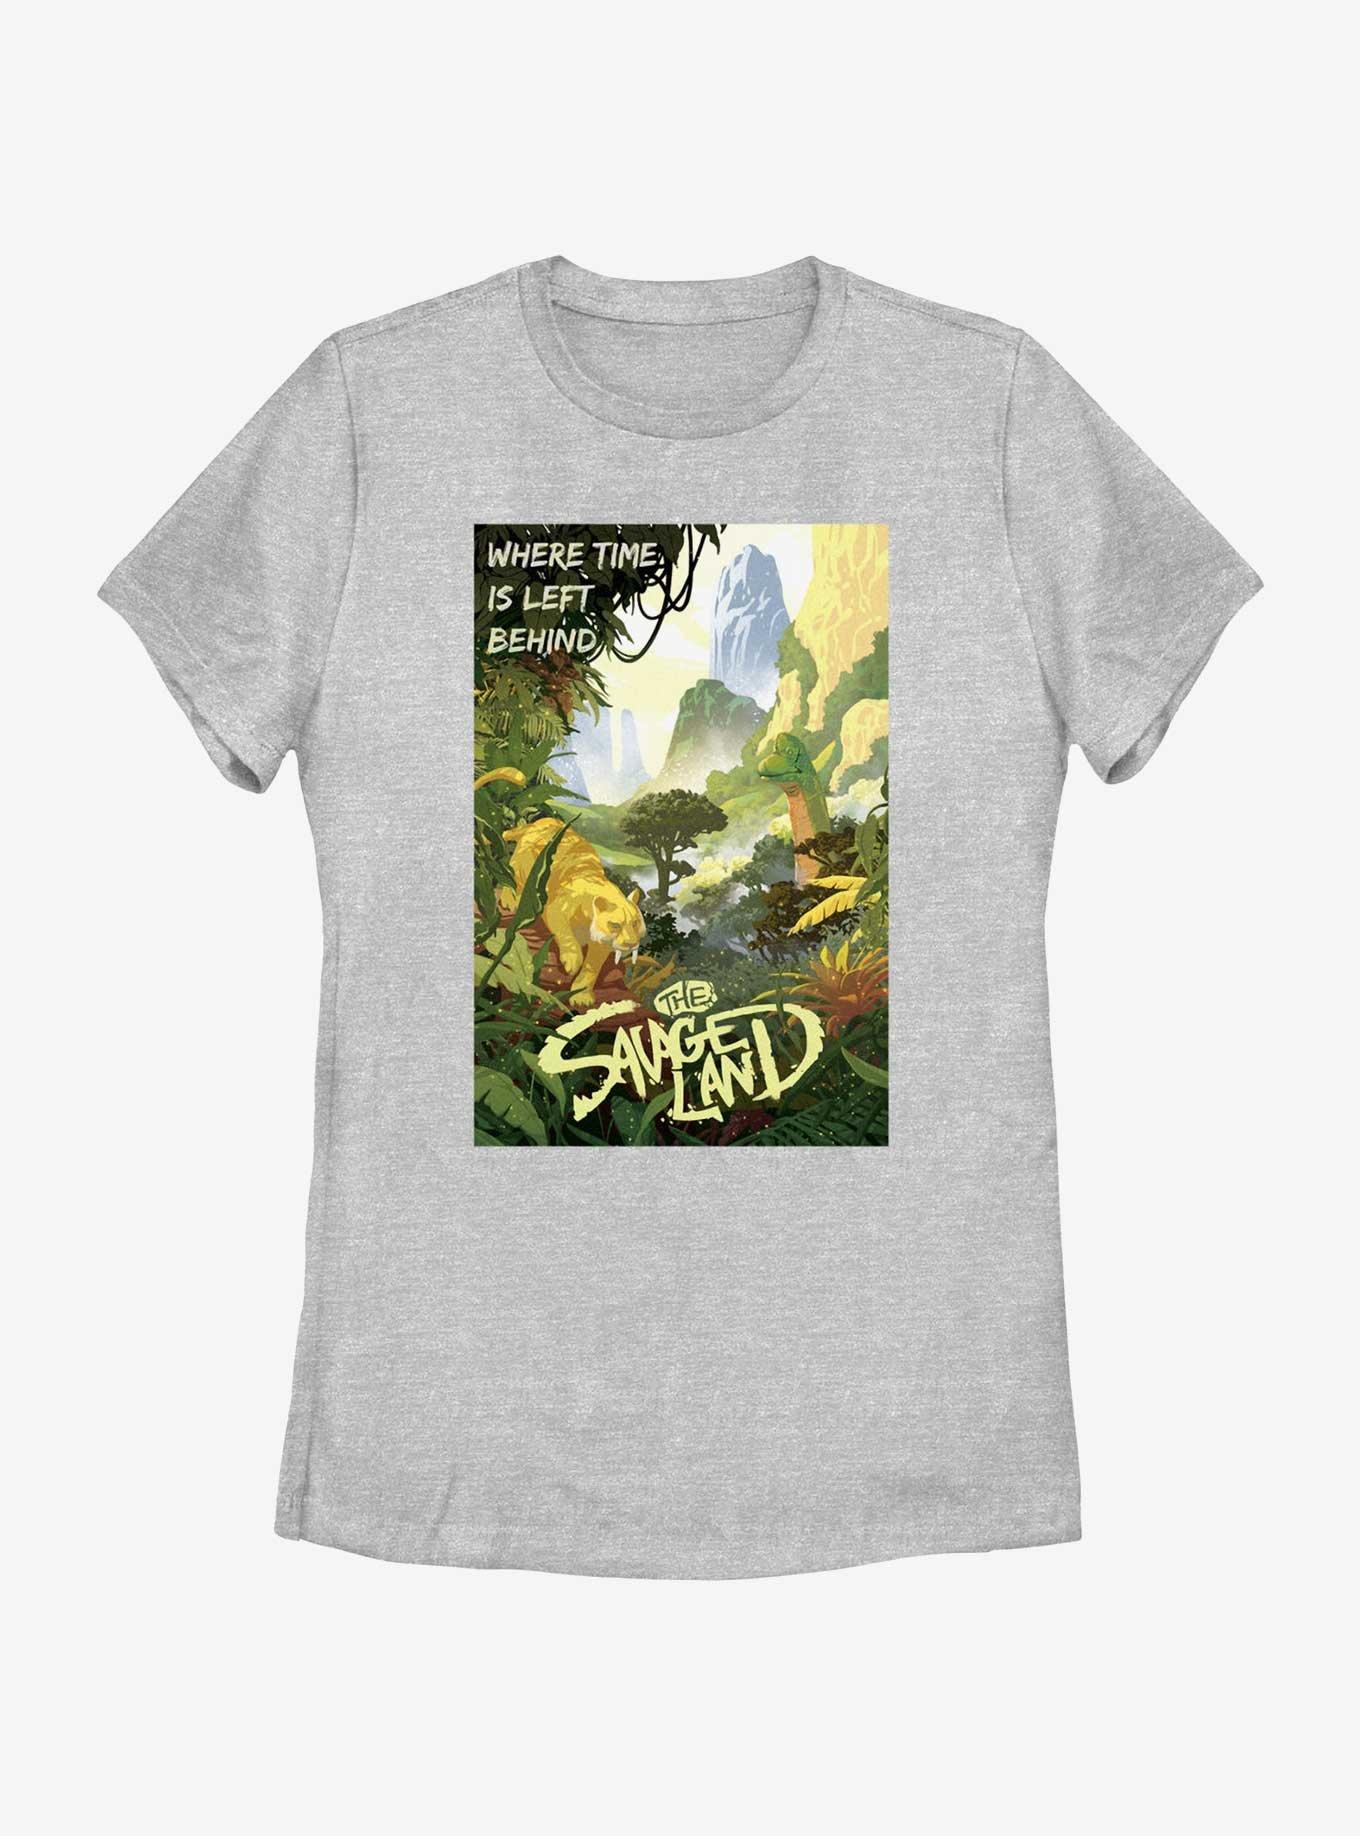 Marvel Avengers The Savageland Quote Womens T-Shirt, ATH HTR, hi-res